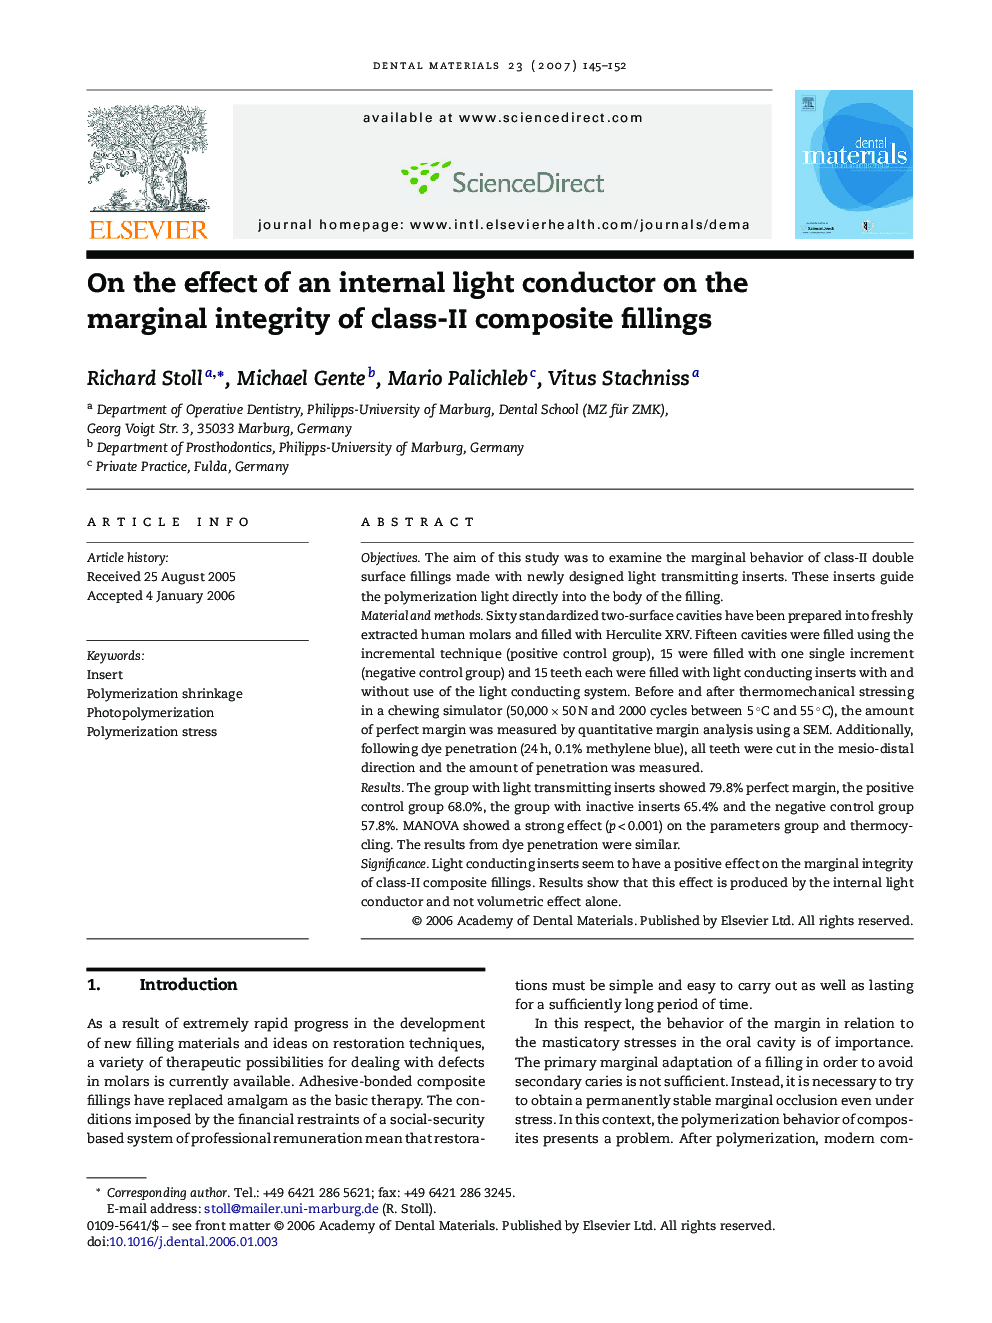 On the effect of an internal light conductor on the marginal integrity of class-II composite fillings